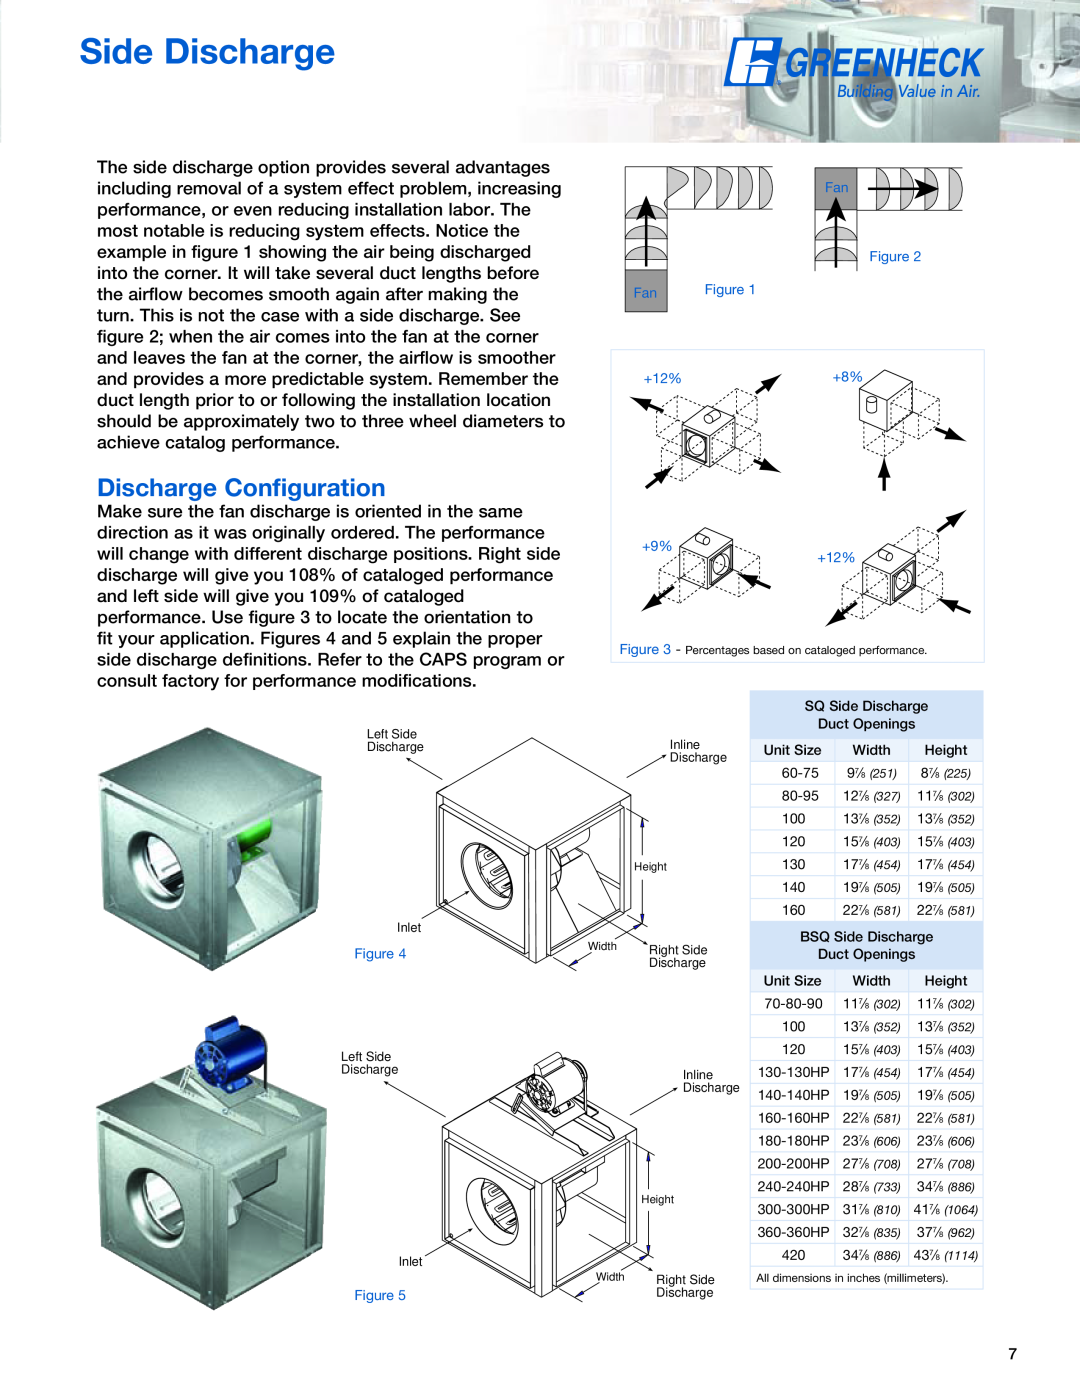 Greenheck Fan SQ manual Side Discharge, Discharge Configuration 